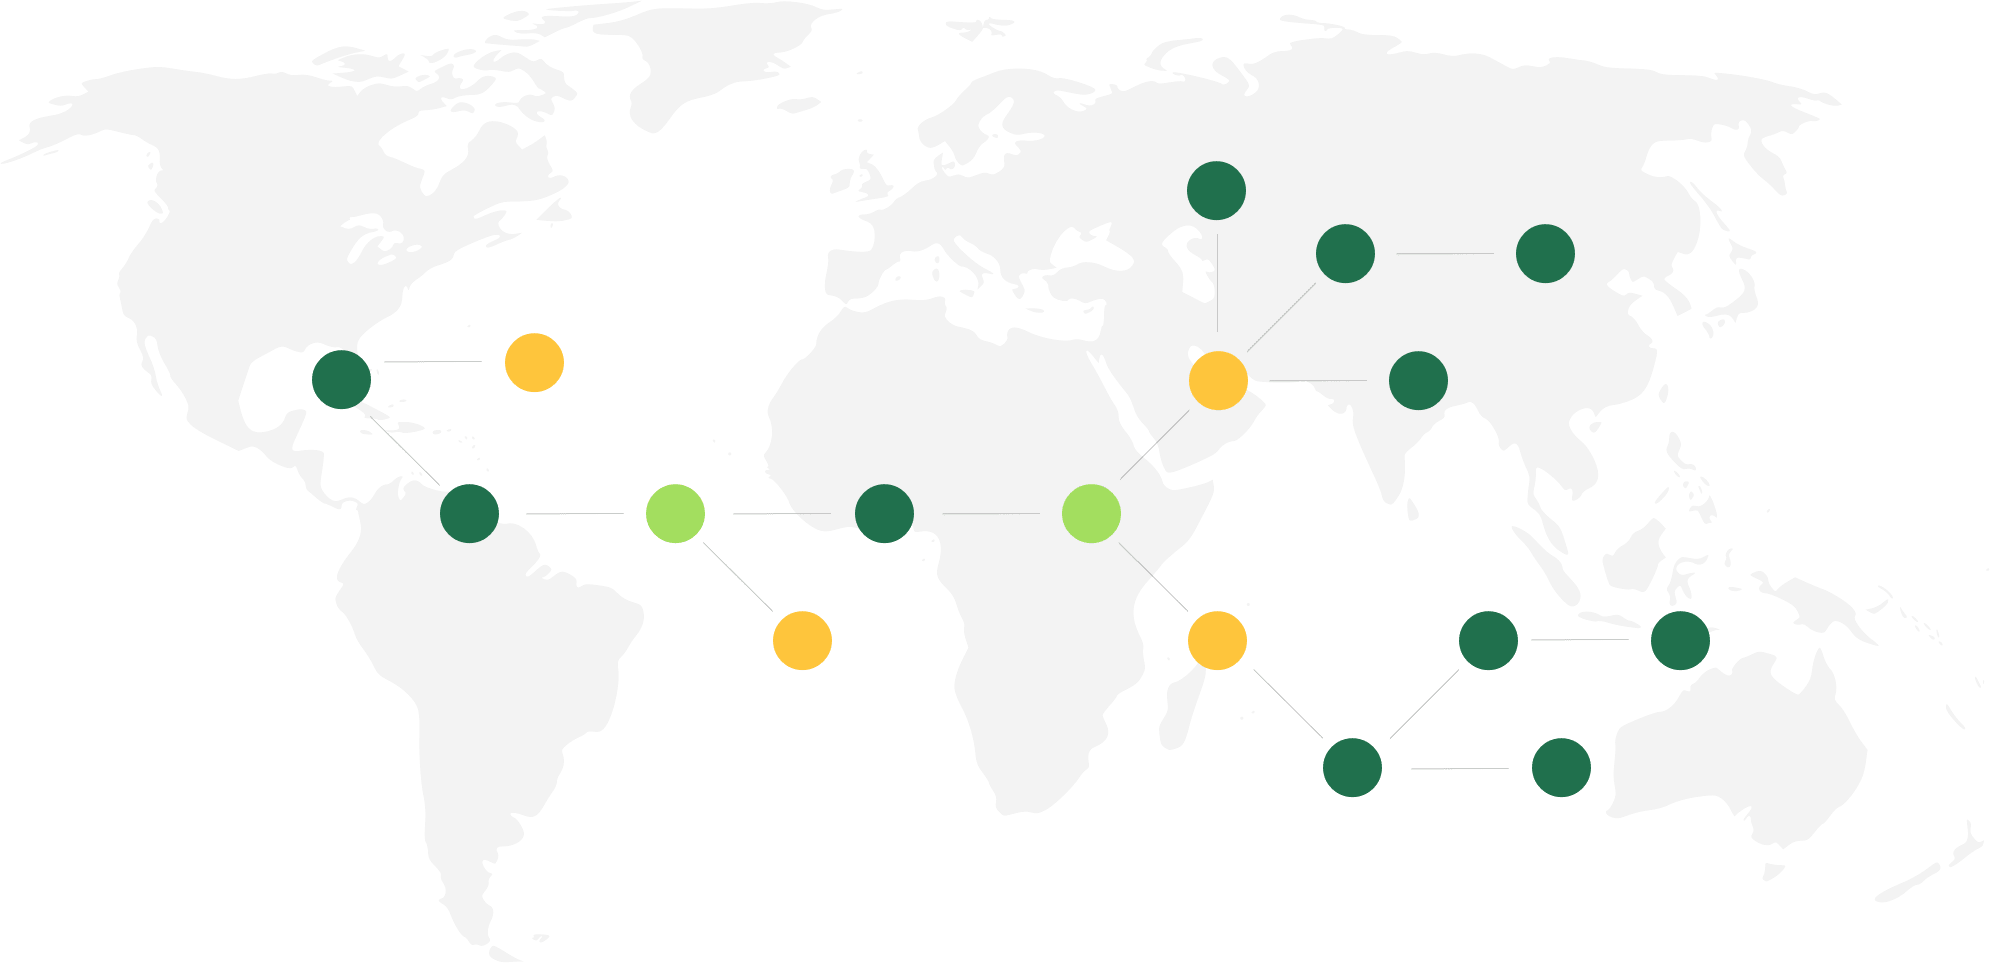 Network illustration by countries